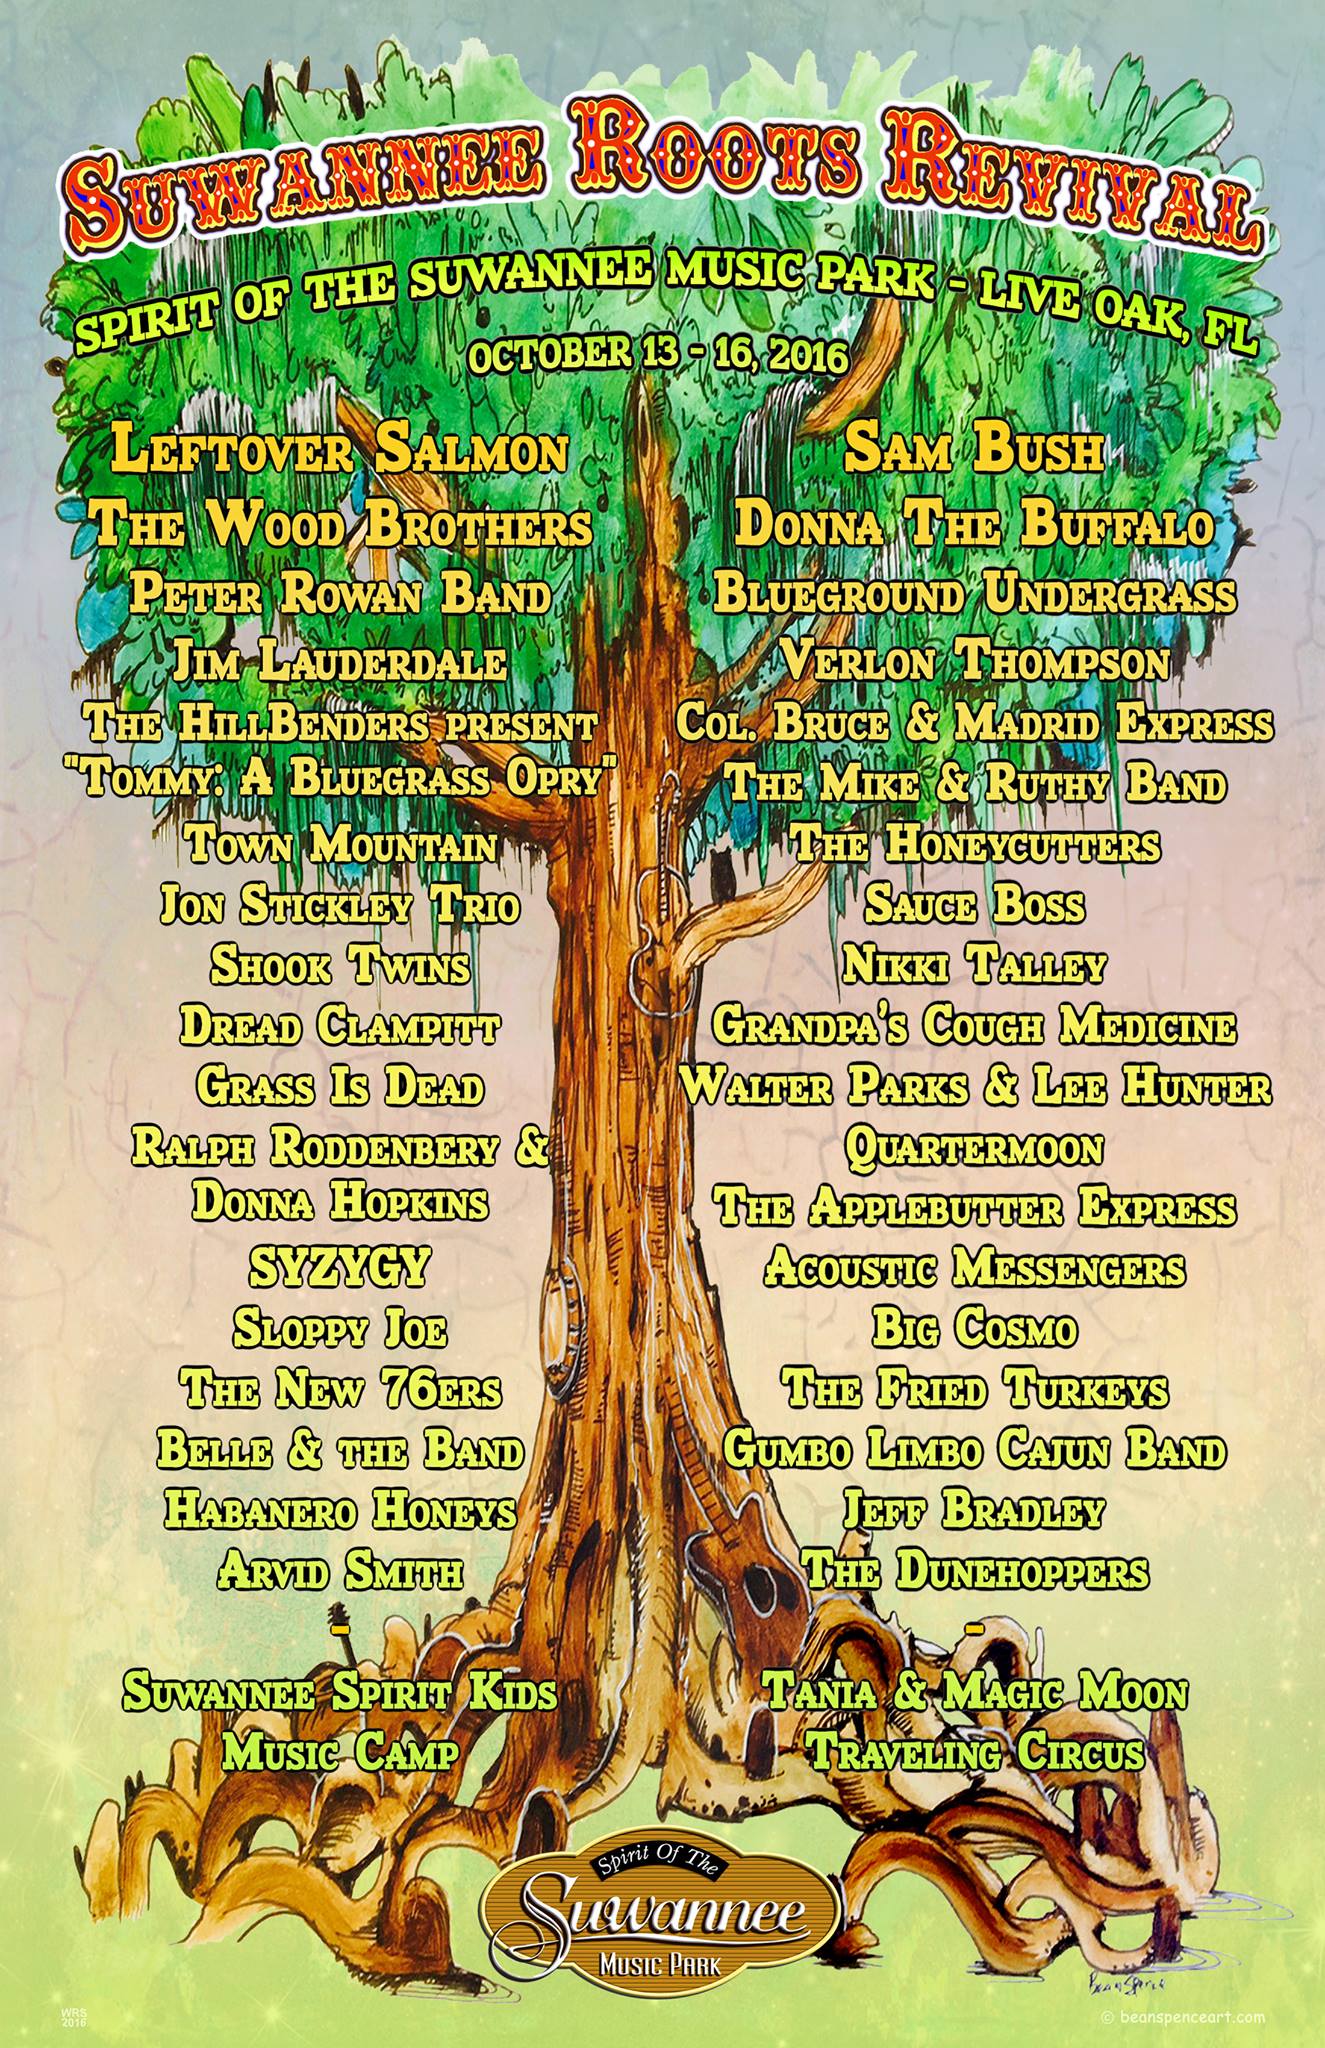 Suwannee Roots Revival 2016 Lineup poster image